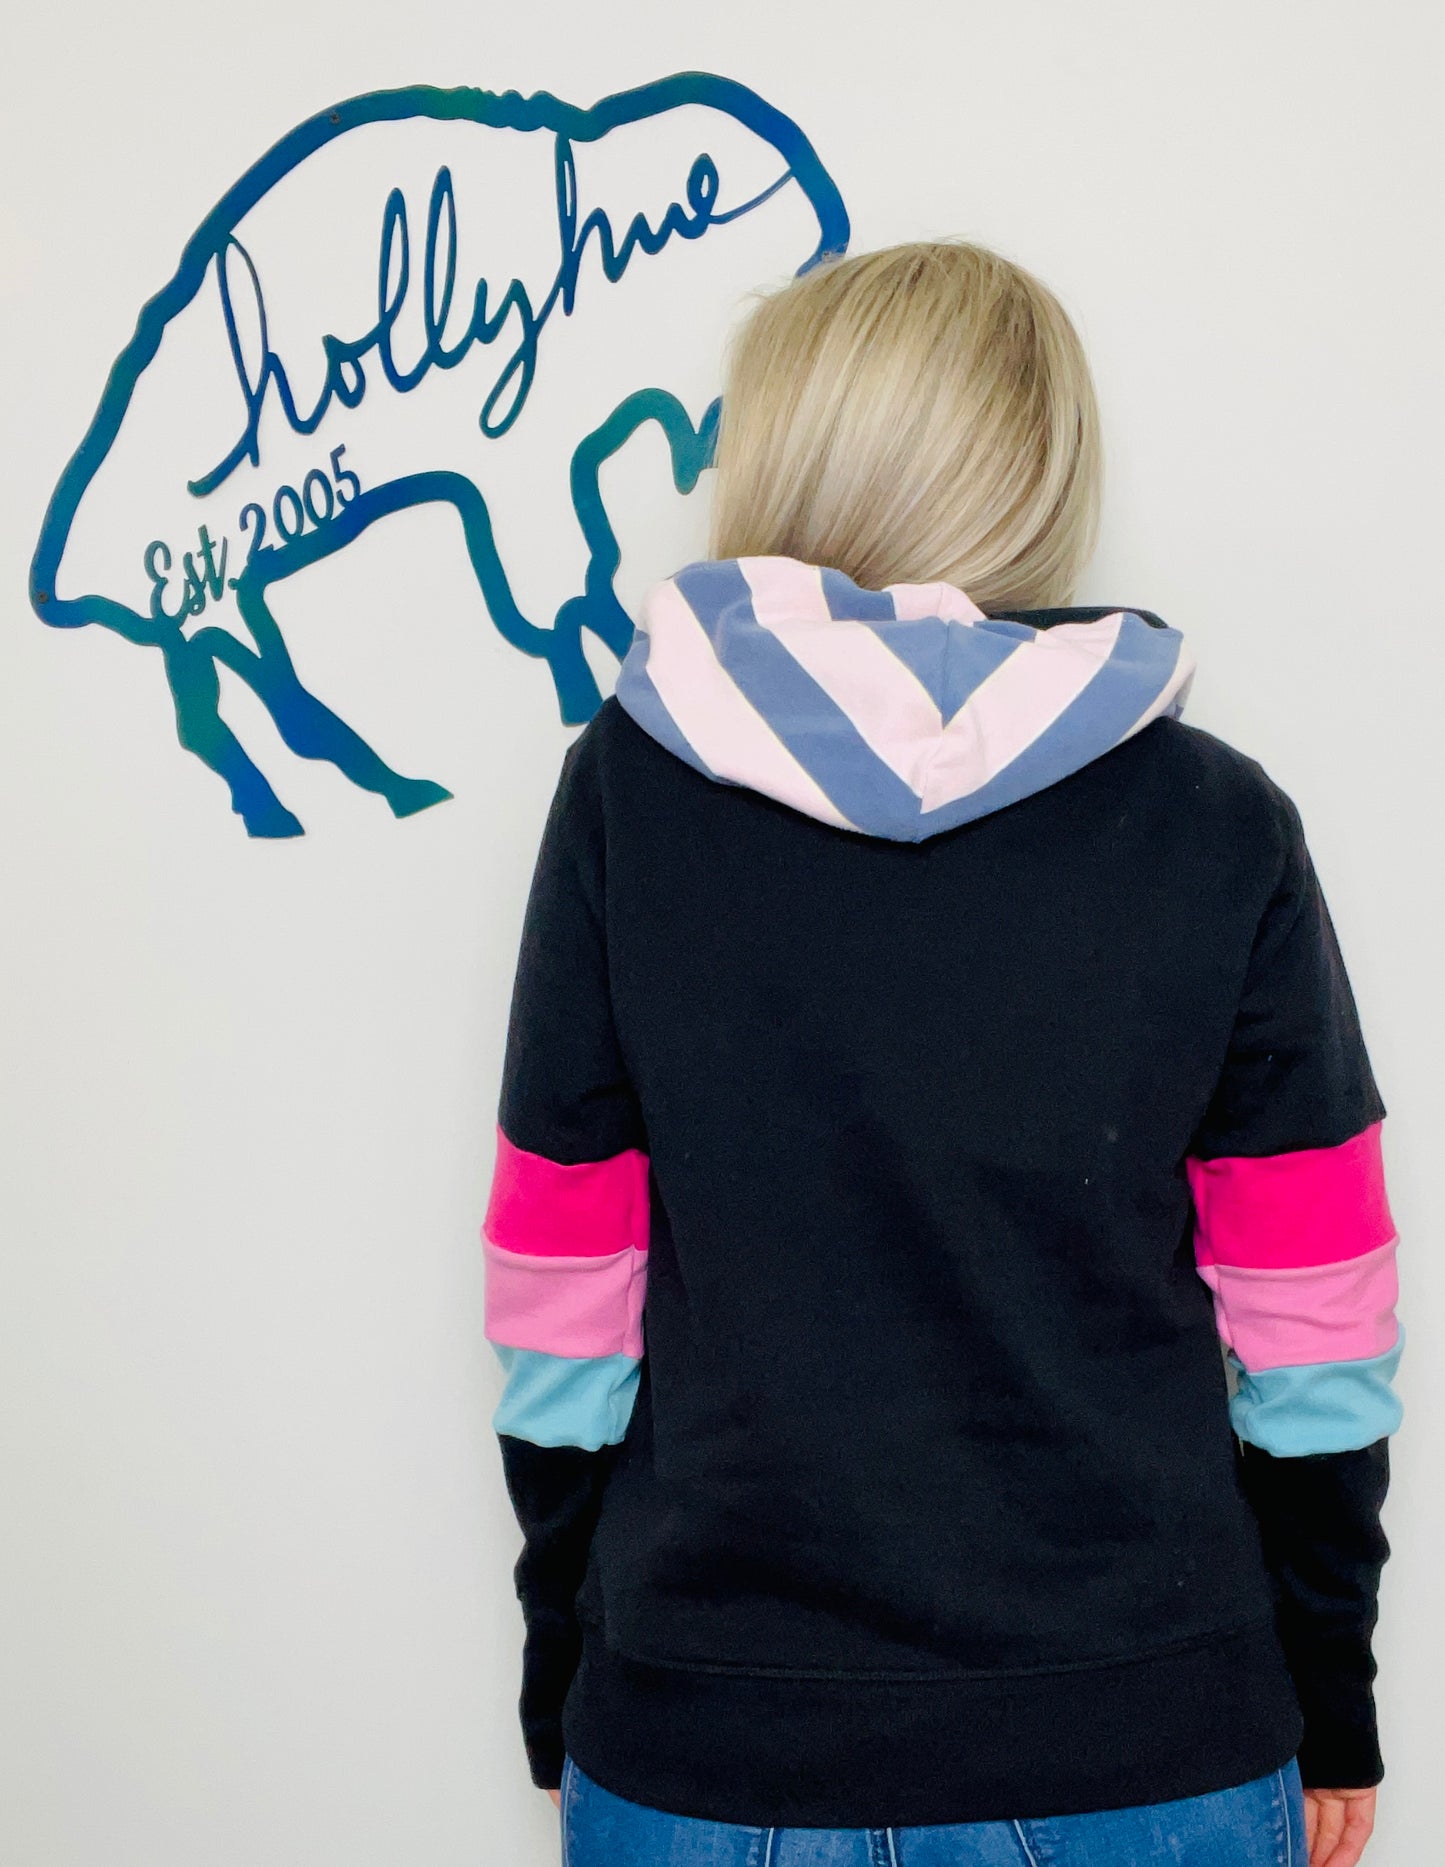 Sprinkles Pink and Black Buffalo Throwback Hoodie Size- Women’s M/L